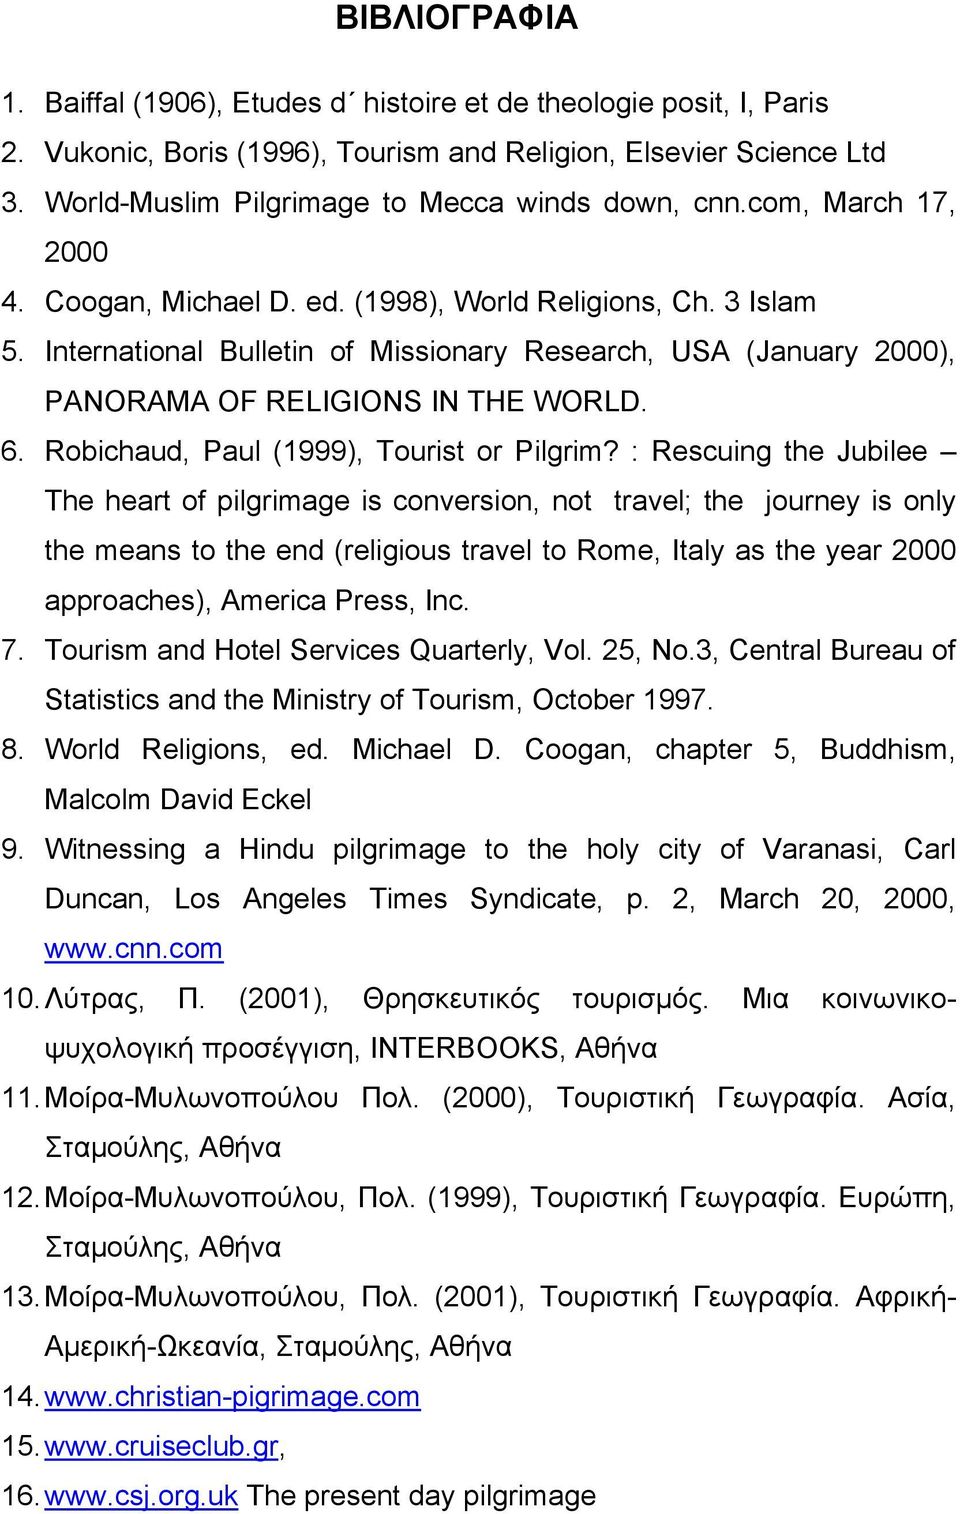 International Bulletin of Missionary Research, USA (January 2000), PANORAMA OF RELIGIONS IN THE WORLD. 6. Robichaud, Paul (1999), Tourist or Pilgrim?